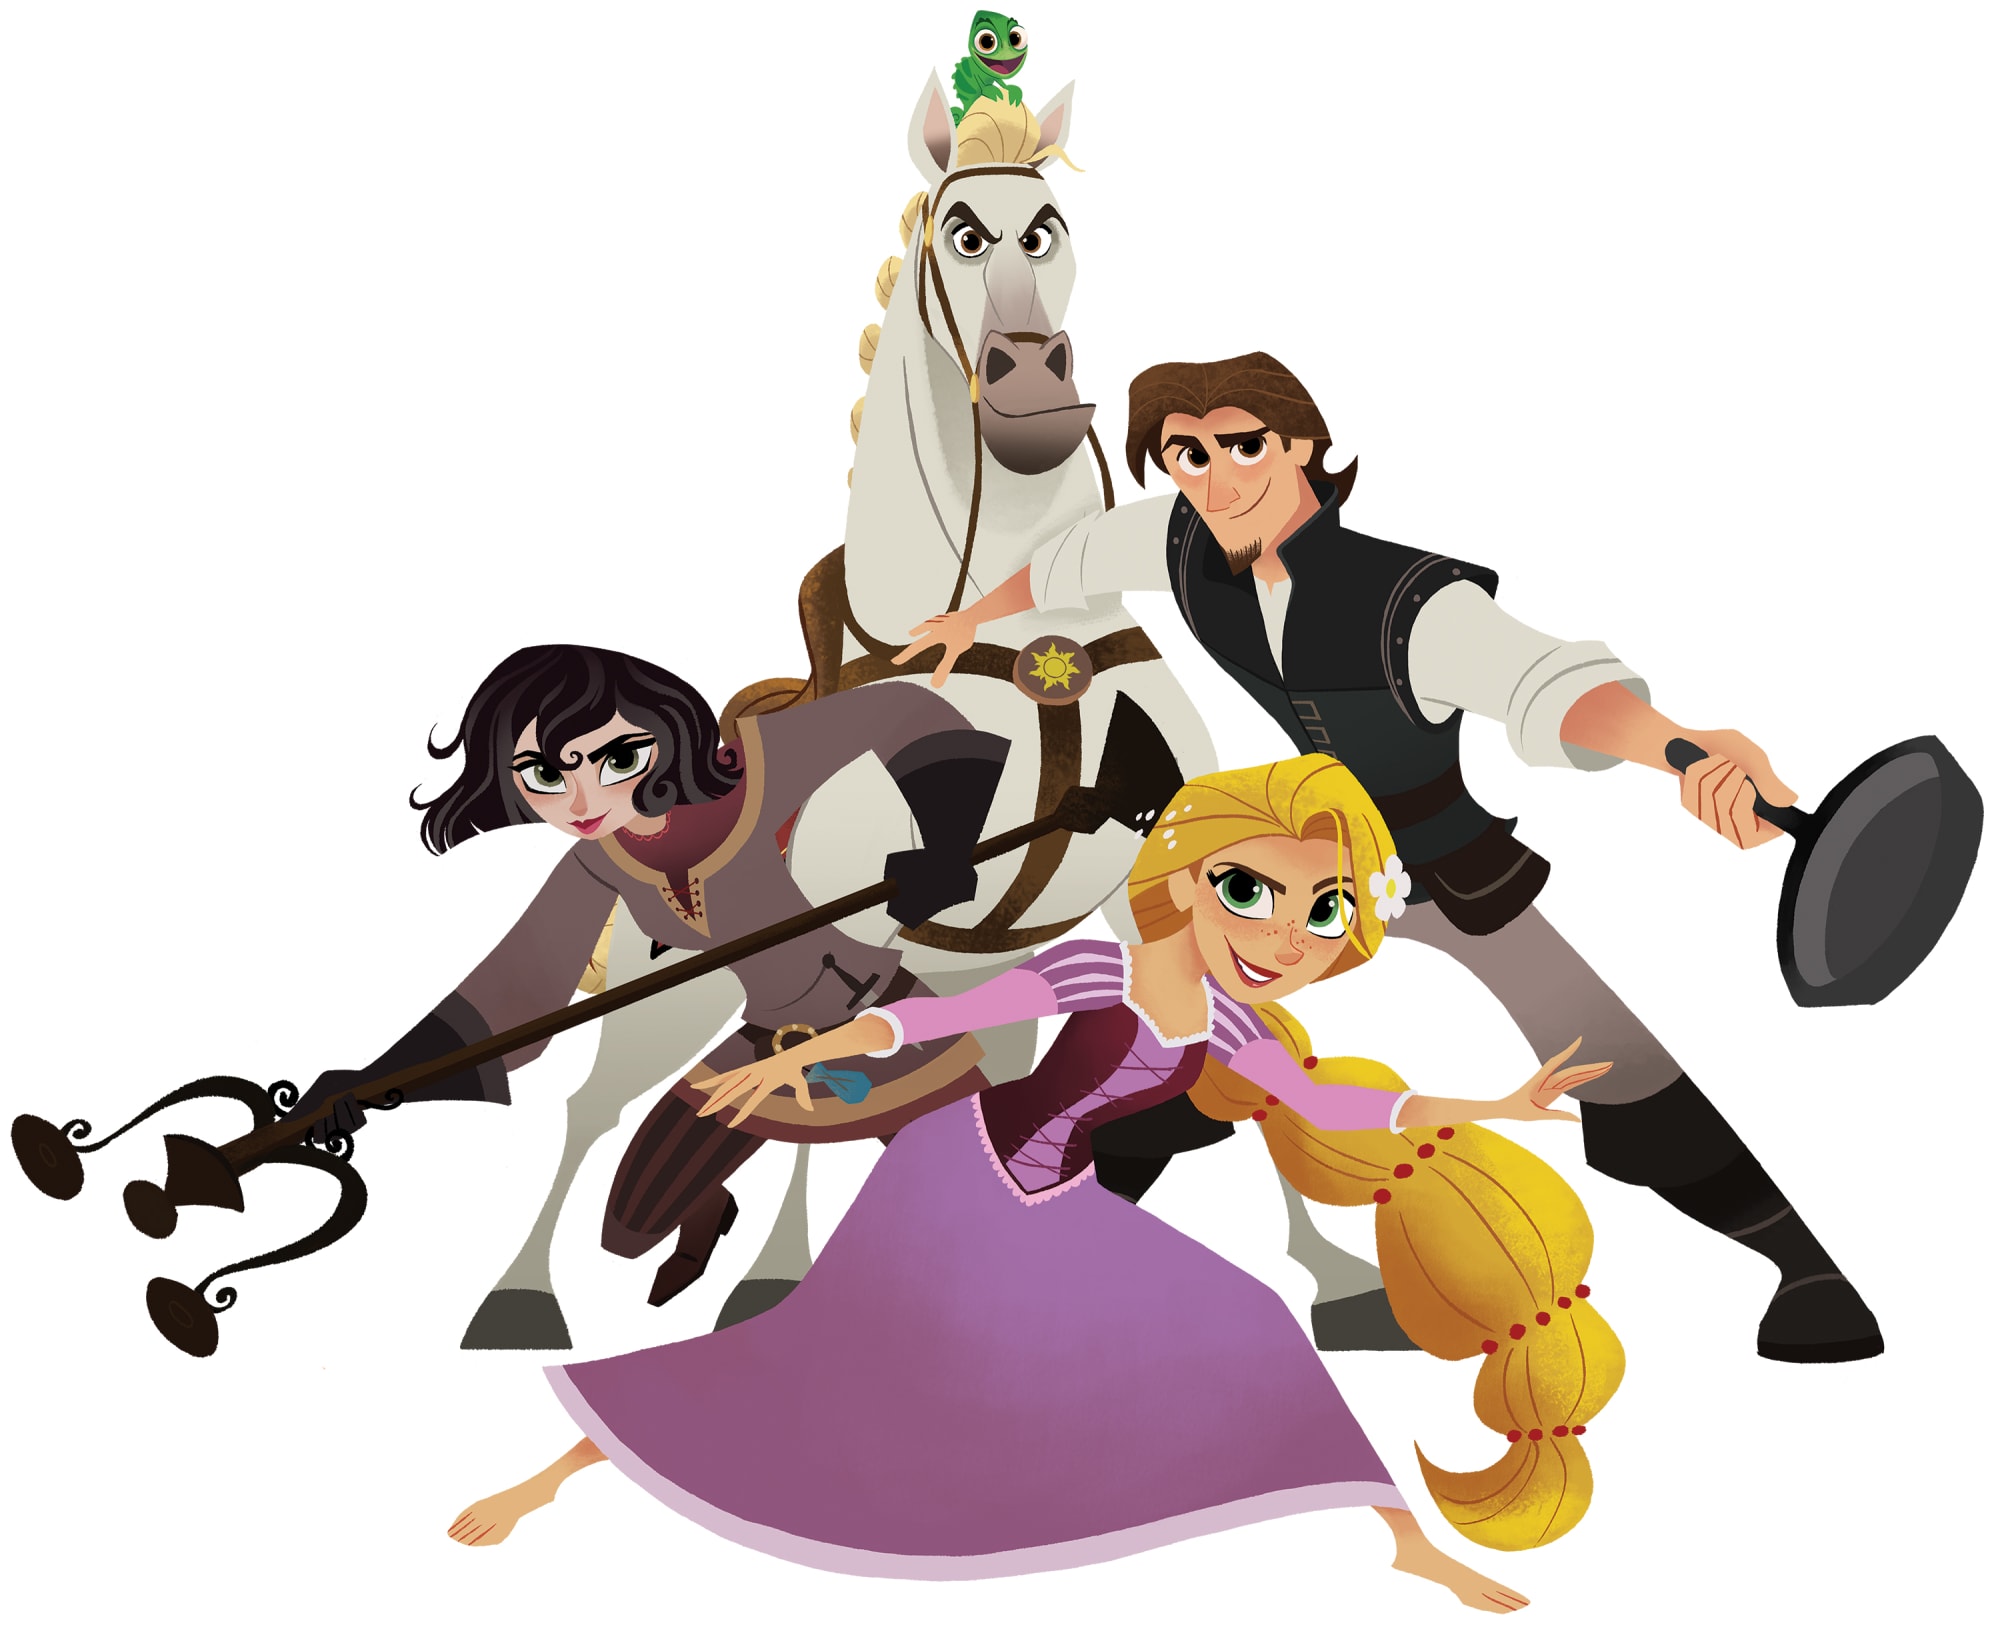 TANGLED: THE SERIES - ï¿½Tangled: The Series,ï¿½ the visually vibrant animated adventure/comedy series that follows Rapunzel as she acquaints herself with her parents, her kingdom and the people of Corona. (Disney Channel)CASSANDRA, MAXIMUS, PASCAL, EUGENE, RAPUNZEL